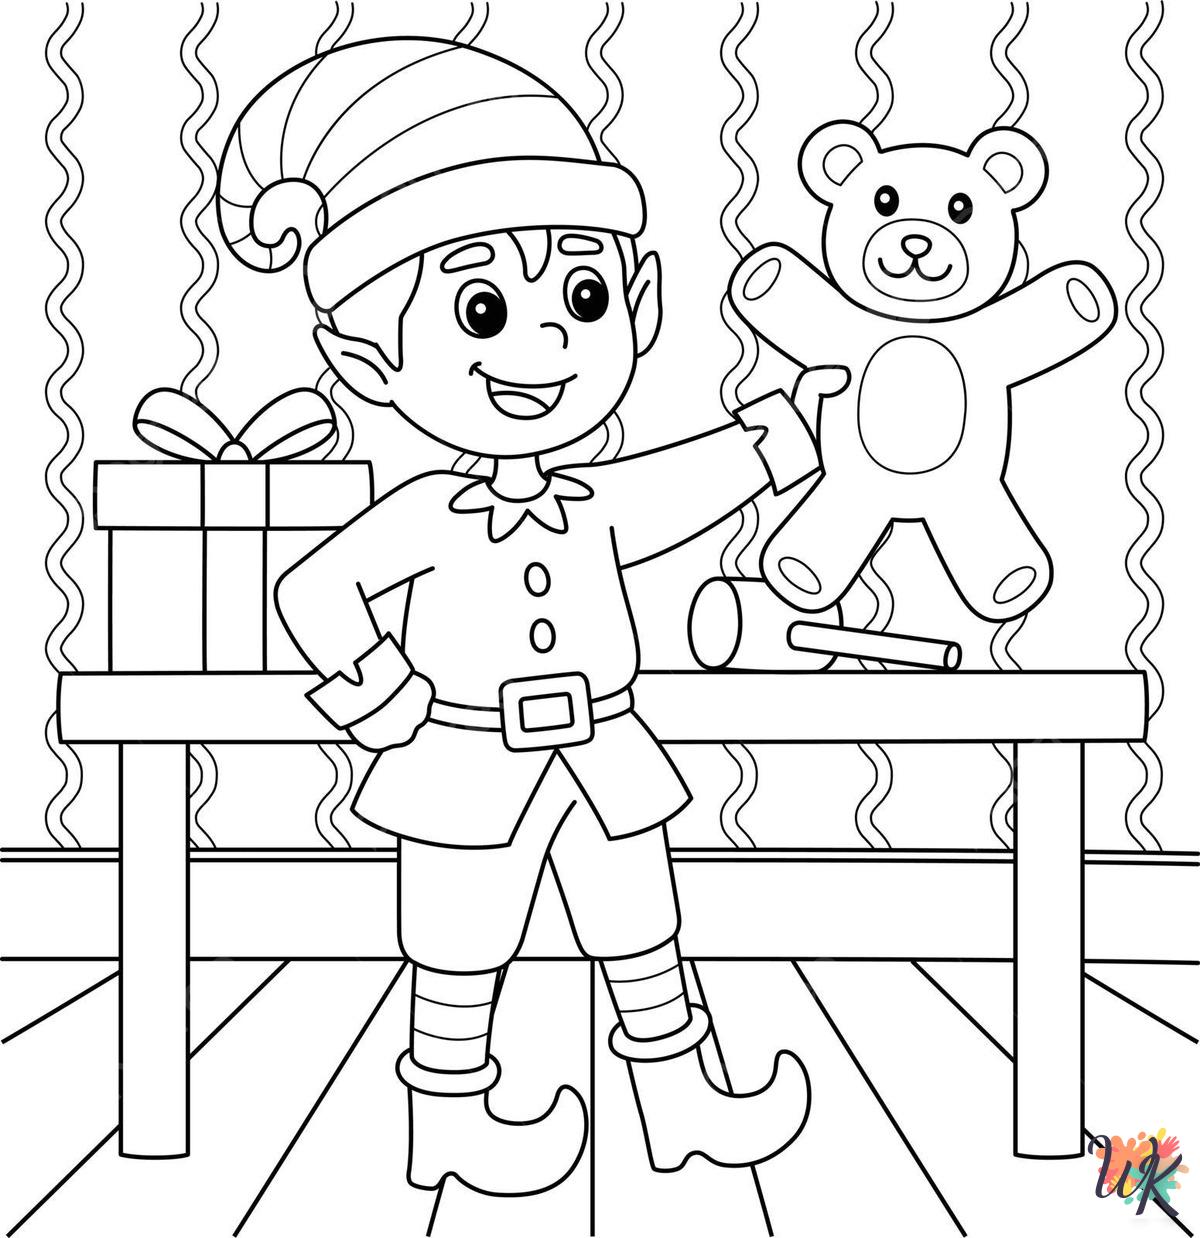 December cards coloring pages